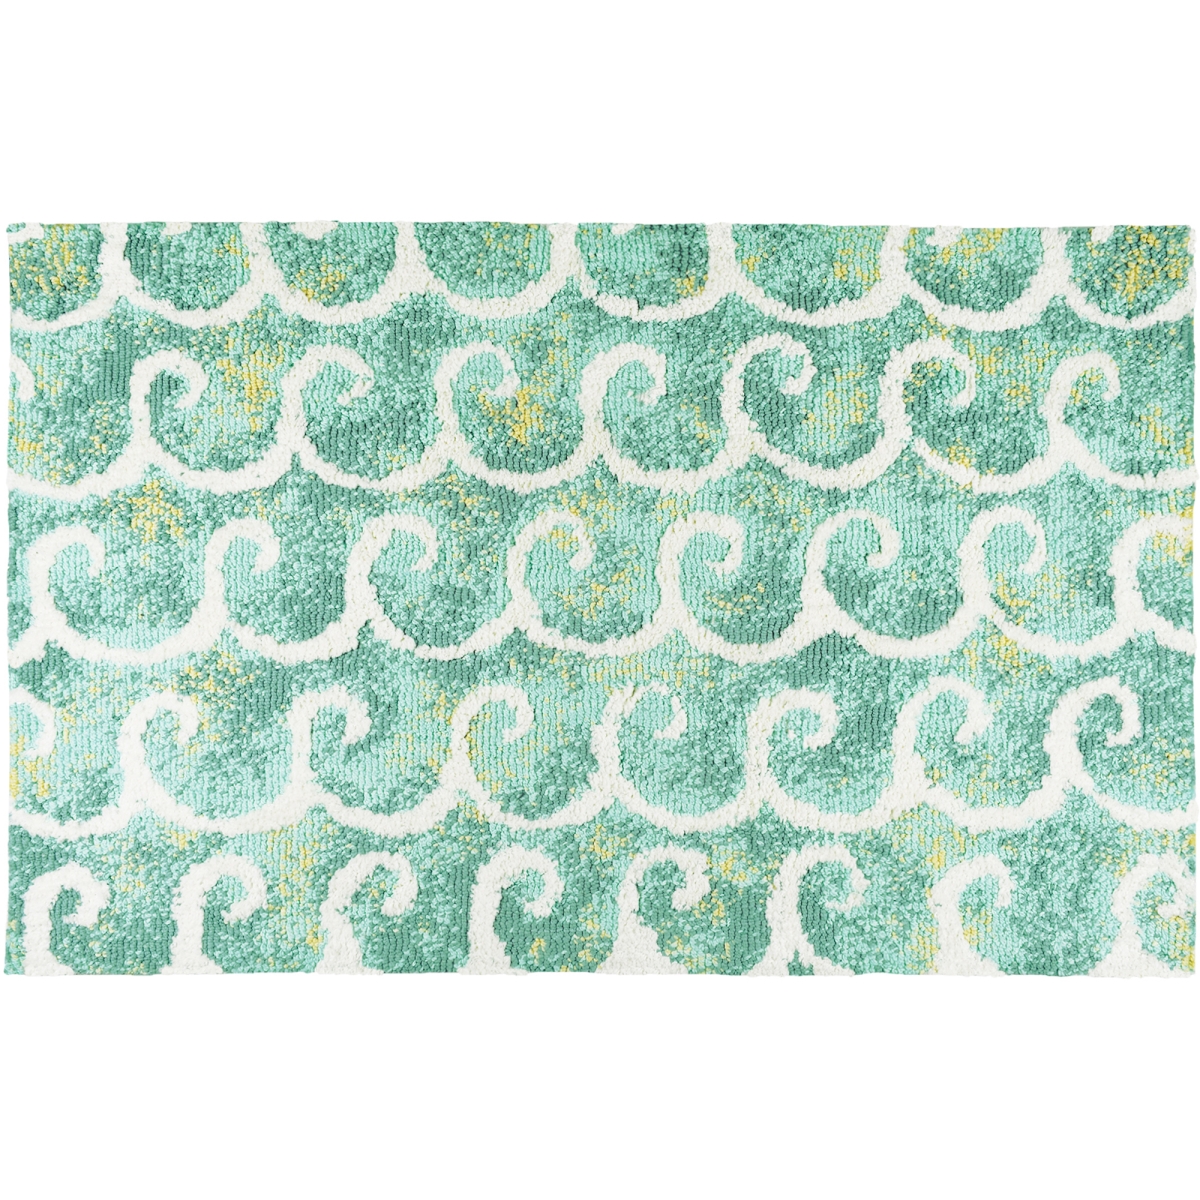 Ss-em001b 21 X 33 In. Dancing Waves Accent Rug